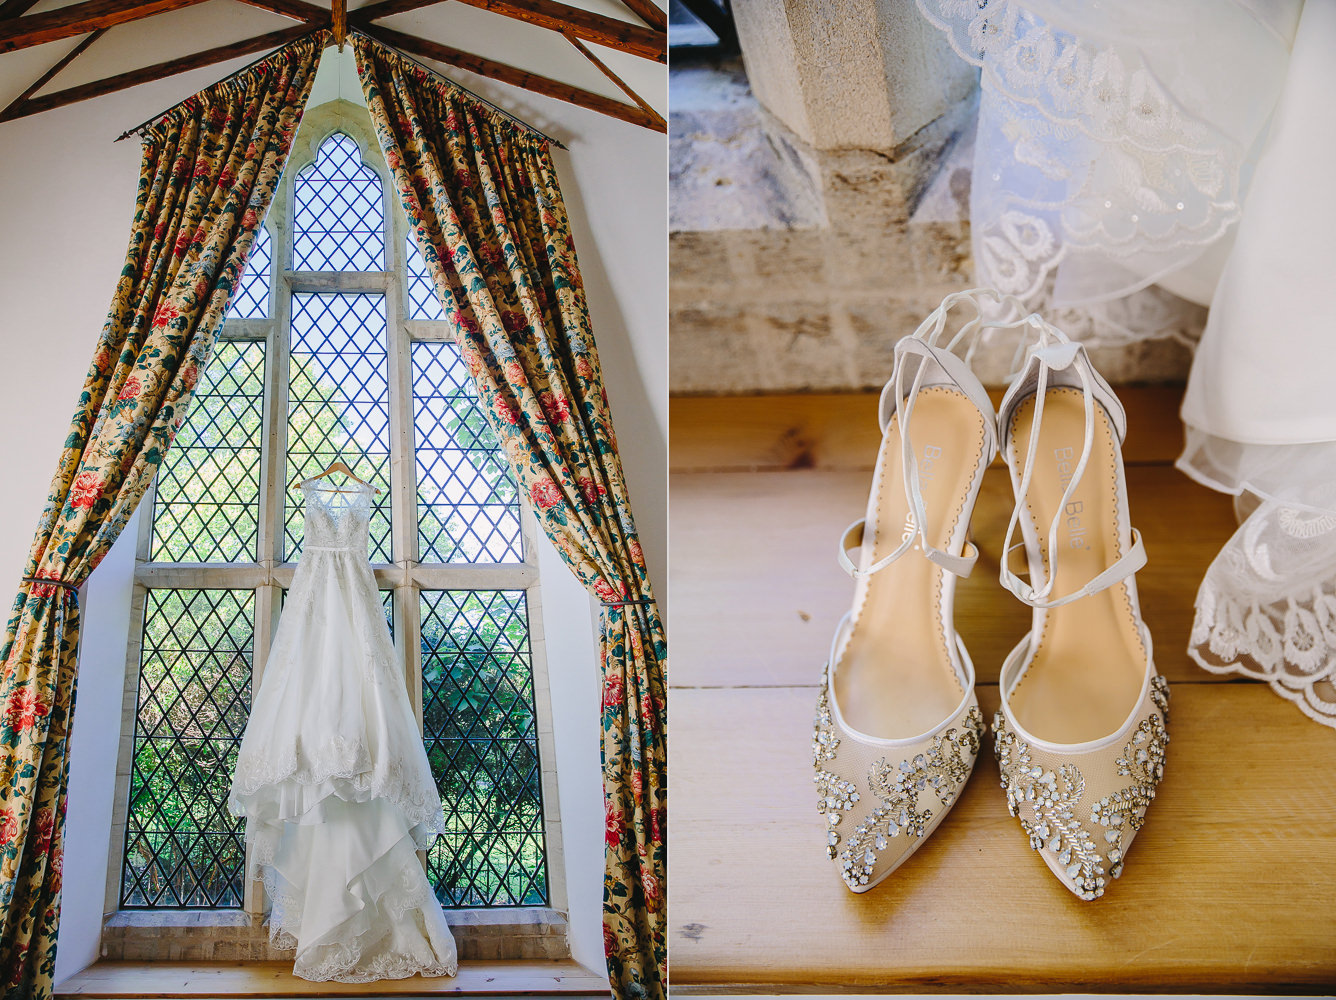 Wedding dress hanging from a large window and wedding shoes on the windowsill.